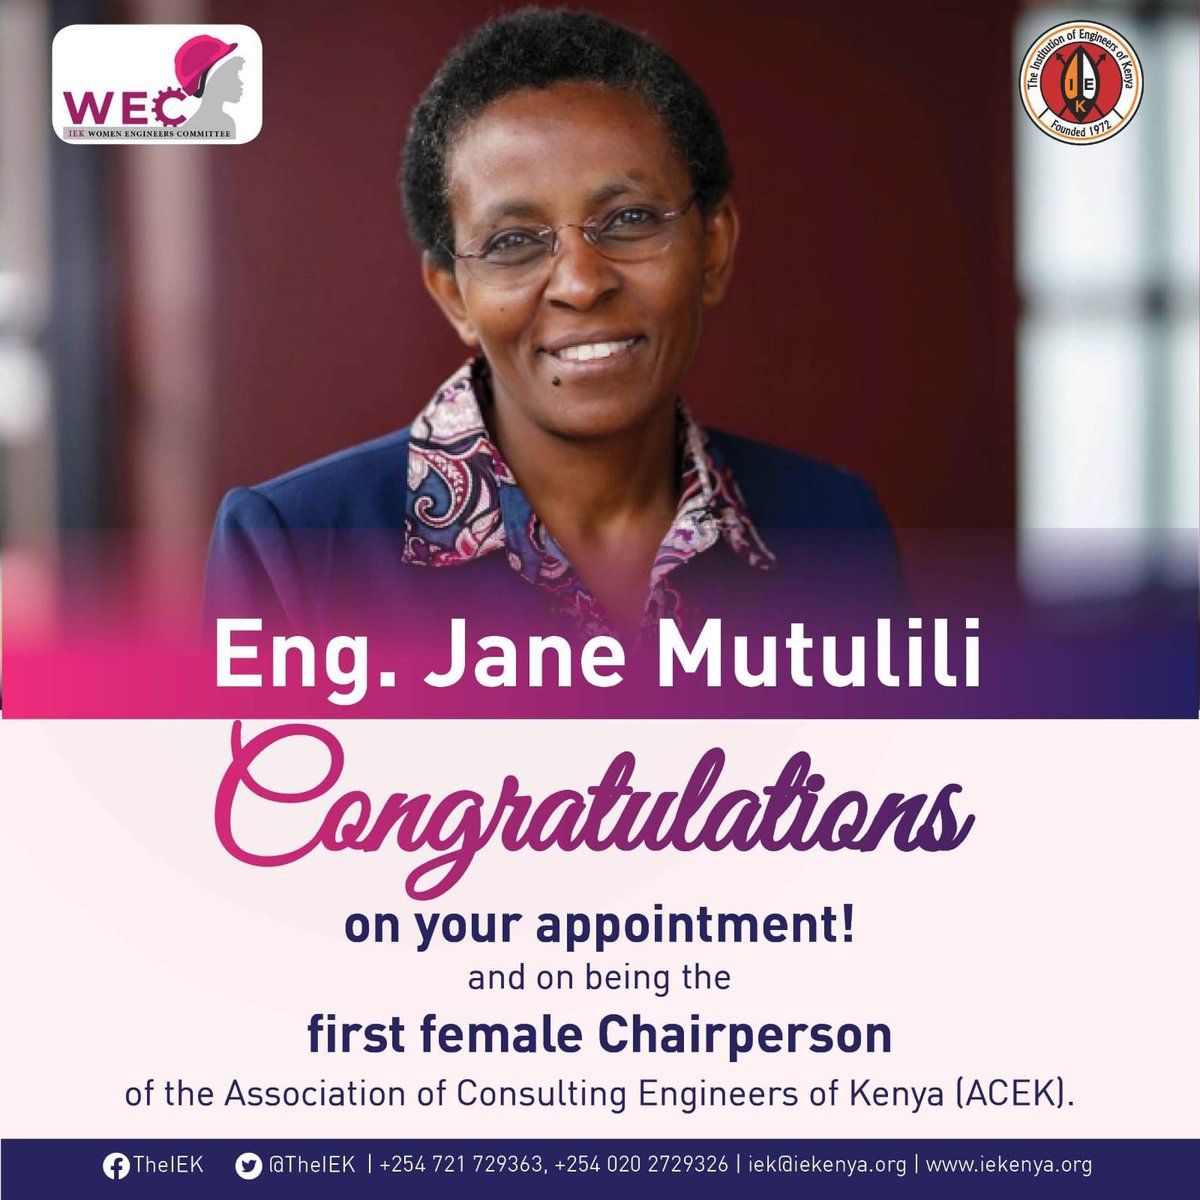 On behalf of WEC members, I take this opportunity to congratulate you madam chair. Thank you for inspiring us and setting the pace! A great role model and mentor to many 🙏🙏🙏🙏 well deserved. @janemutulili @ACEK1968 @TheIEK @EngineersBoard